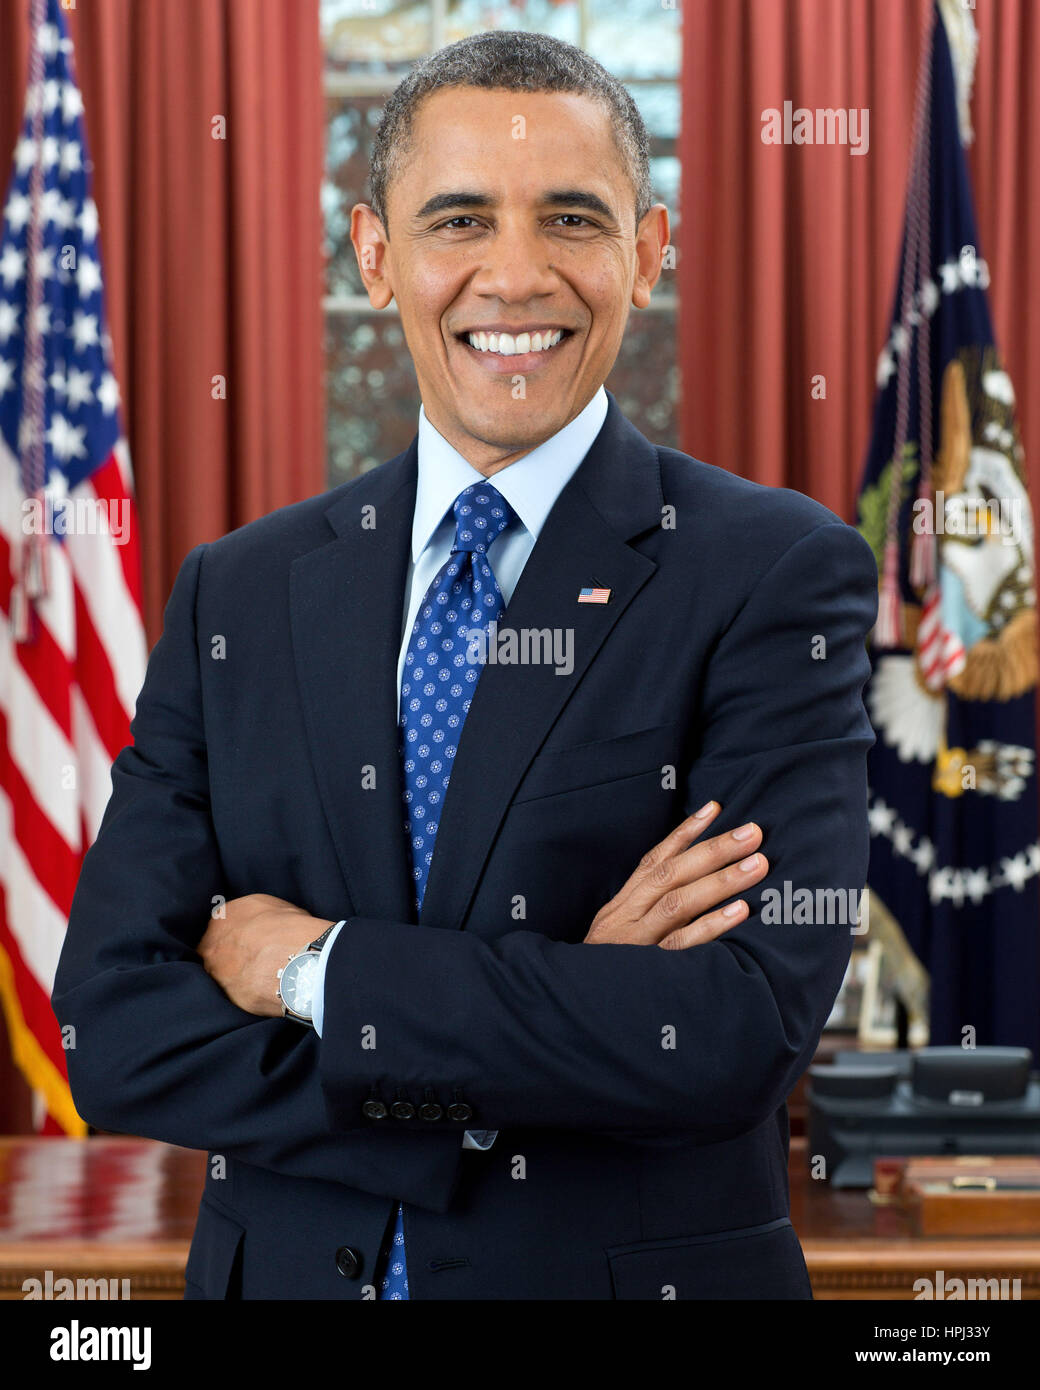 PRESIDENT BARACK OBAMA poses for an official photo in the Oval Office, 6 December 2012.  Photo: Pete Souza/White House official Stock Photo